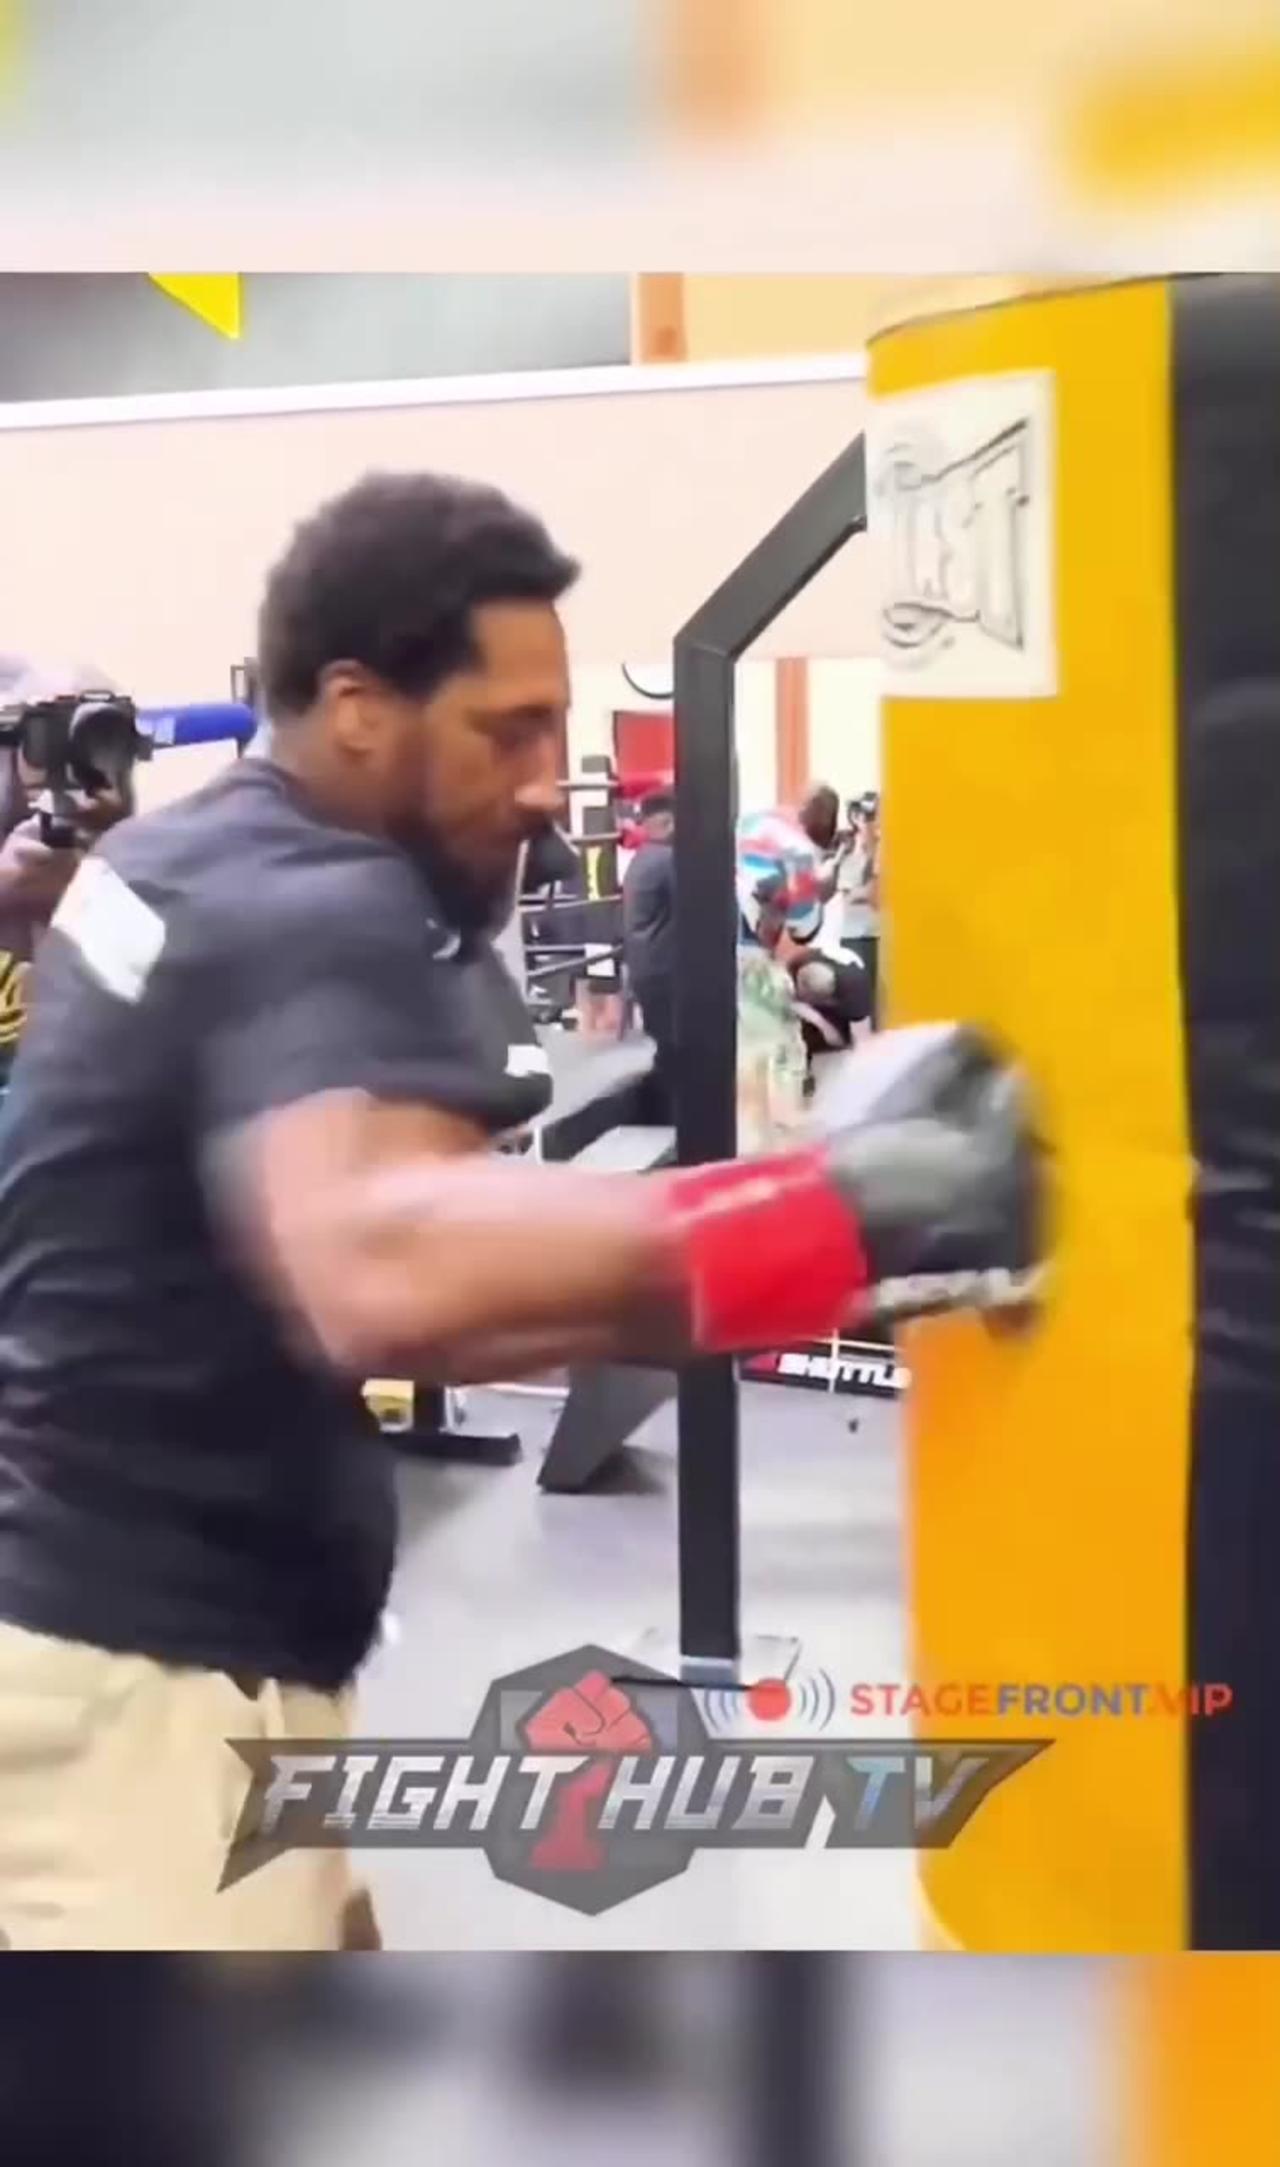 Undefeated Andrade throws lazer sharp combos on the heavy bag preparing for the benavidez fight